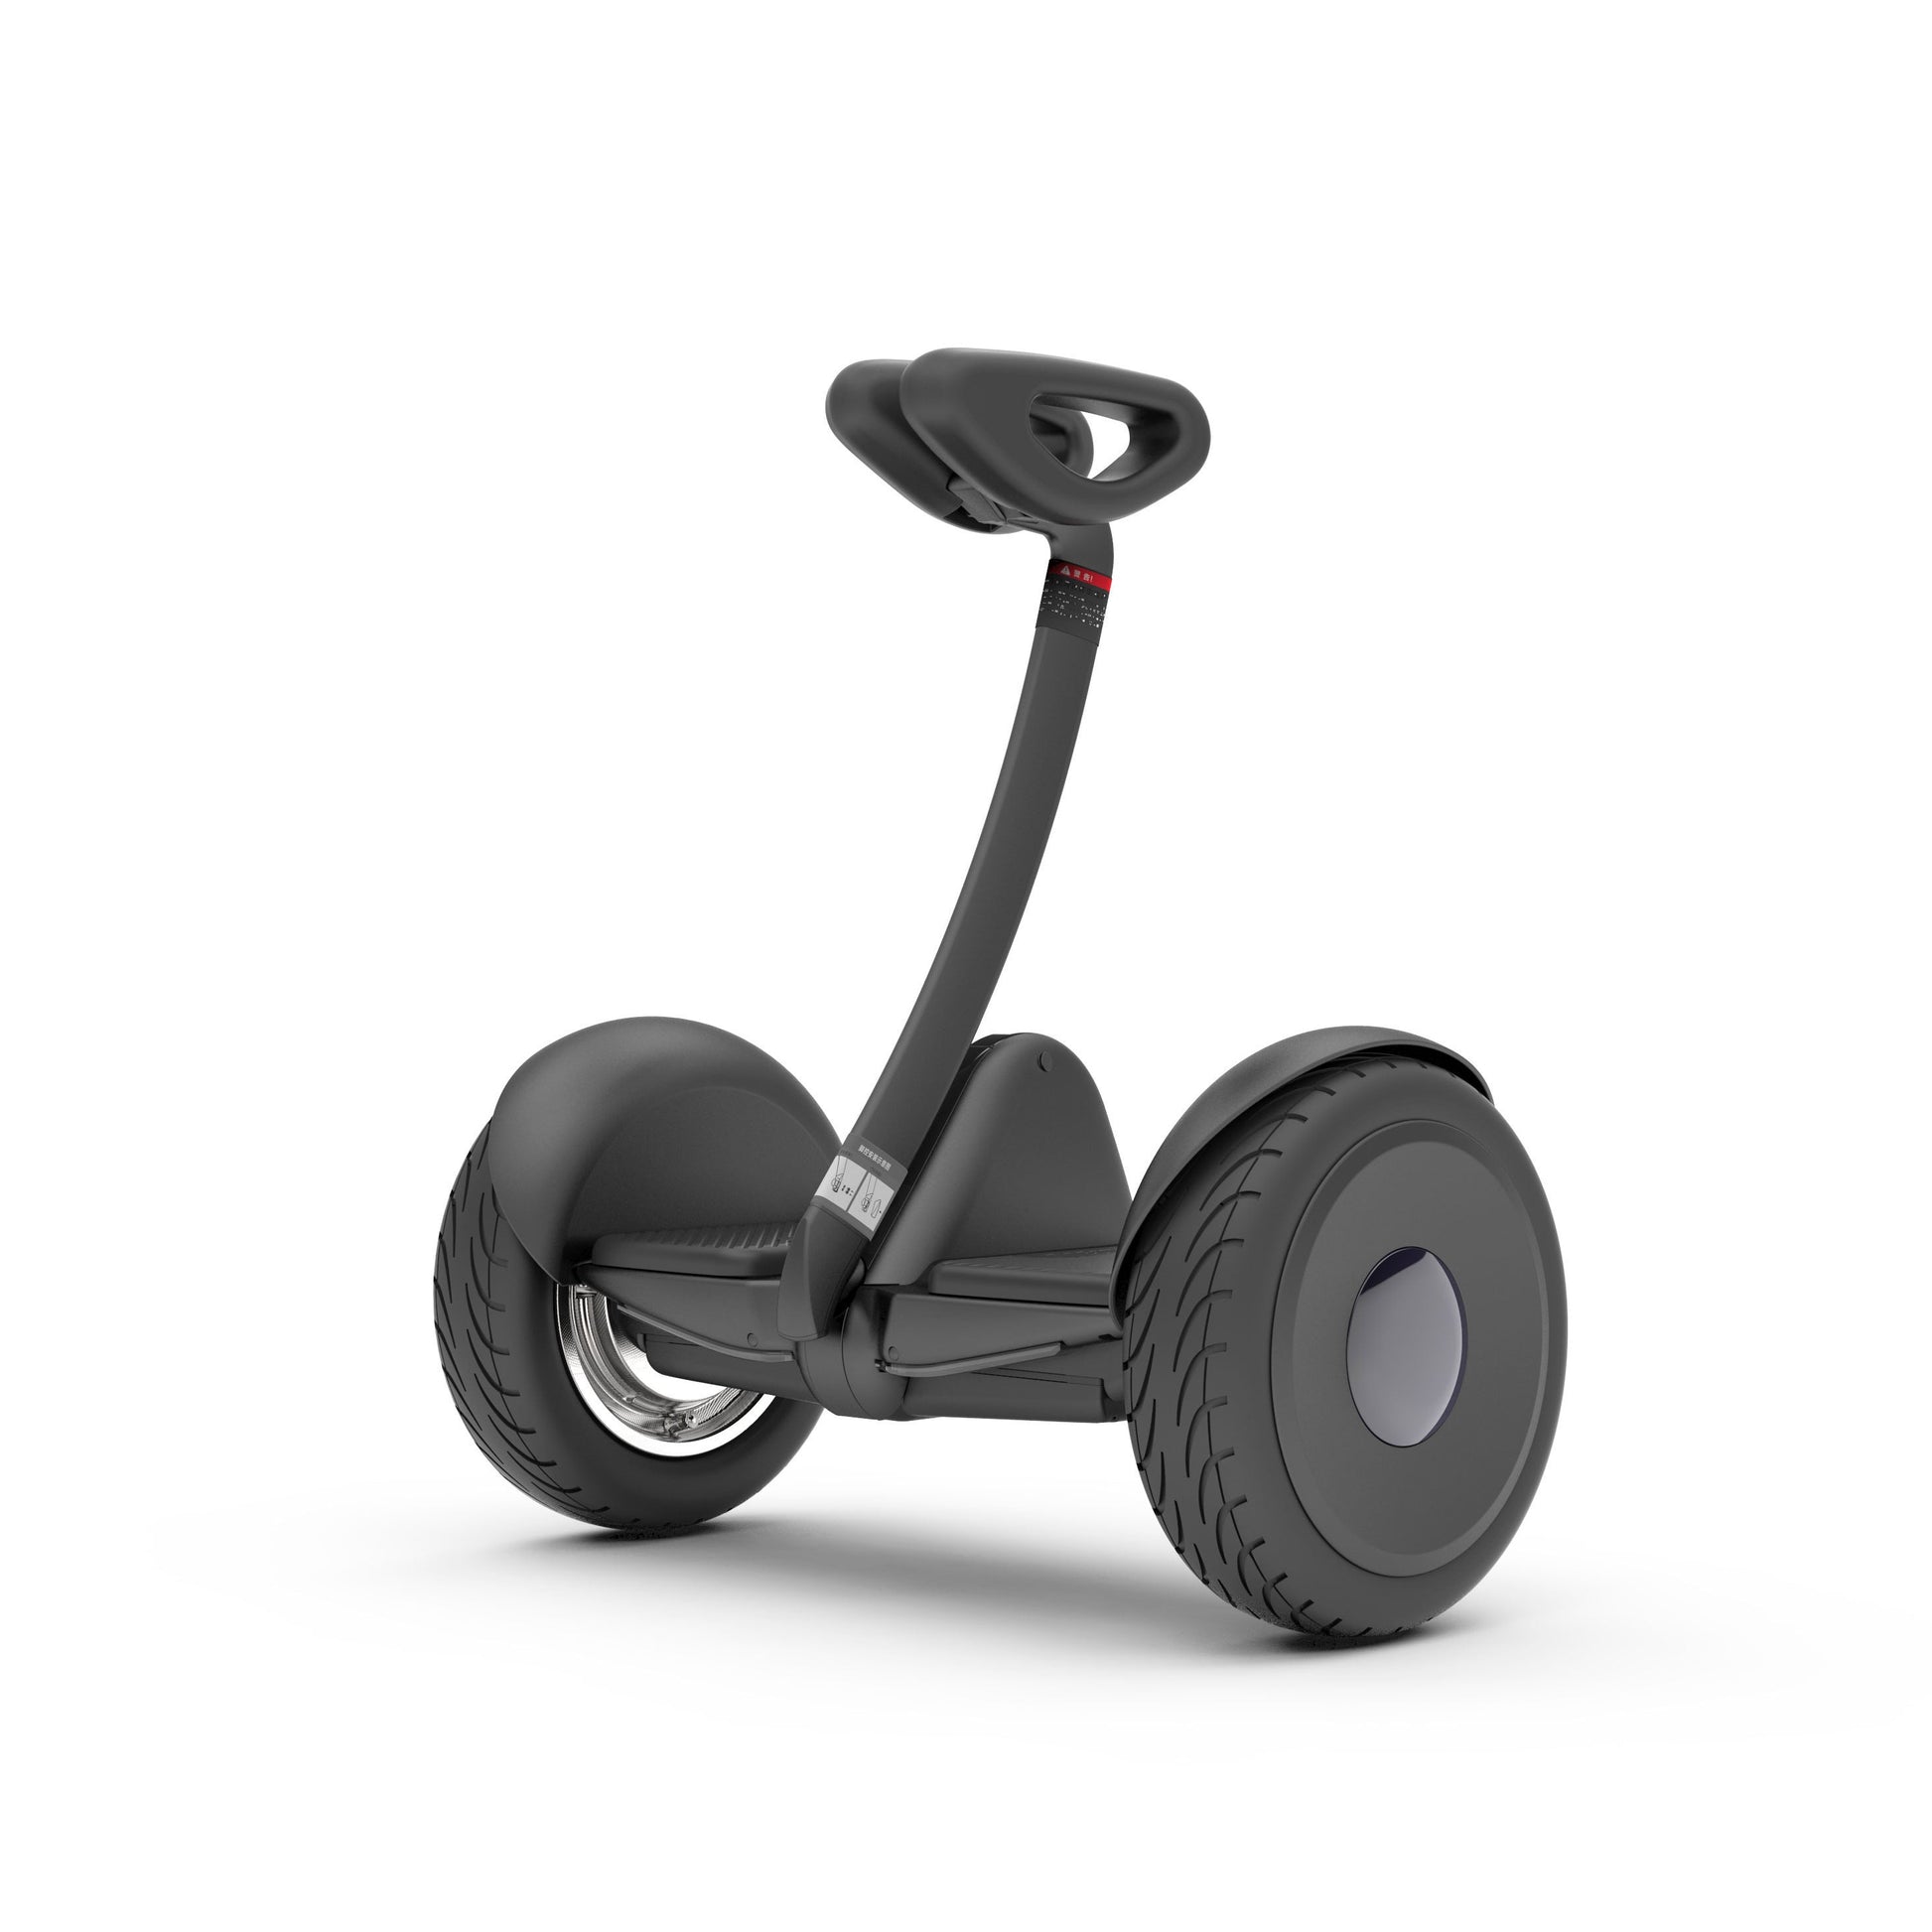 Segway Ninebot S self balancing hoverboard compatible with go cart comparable to the minipro